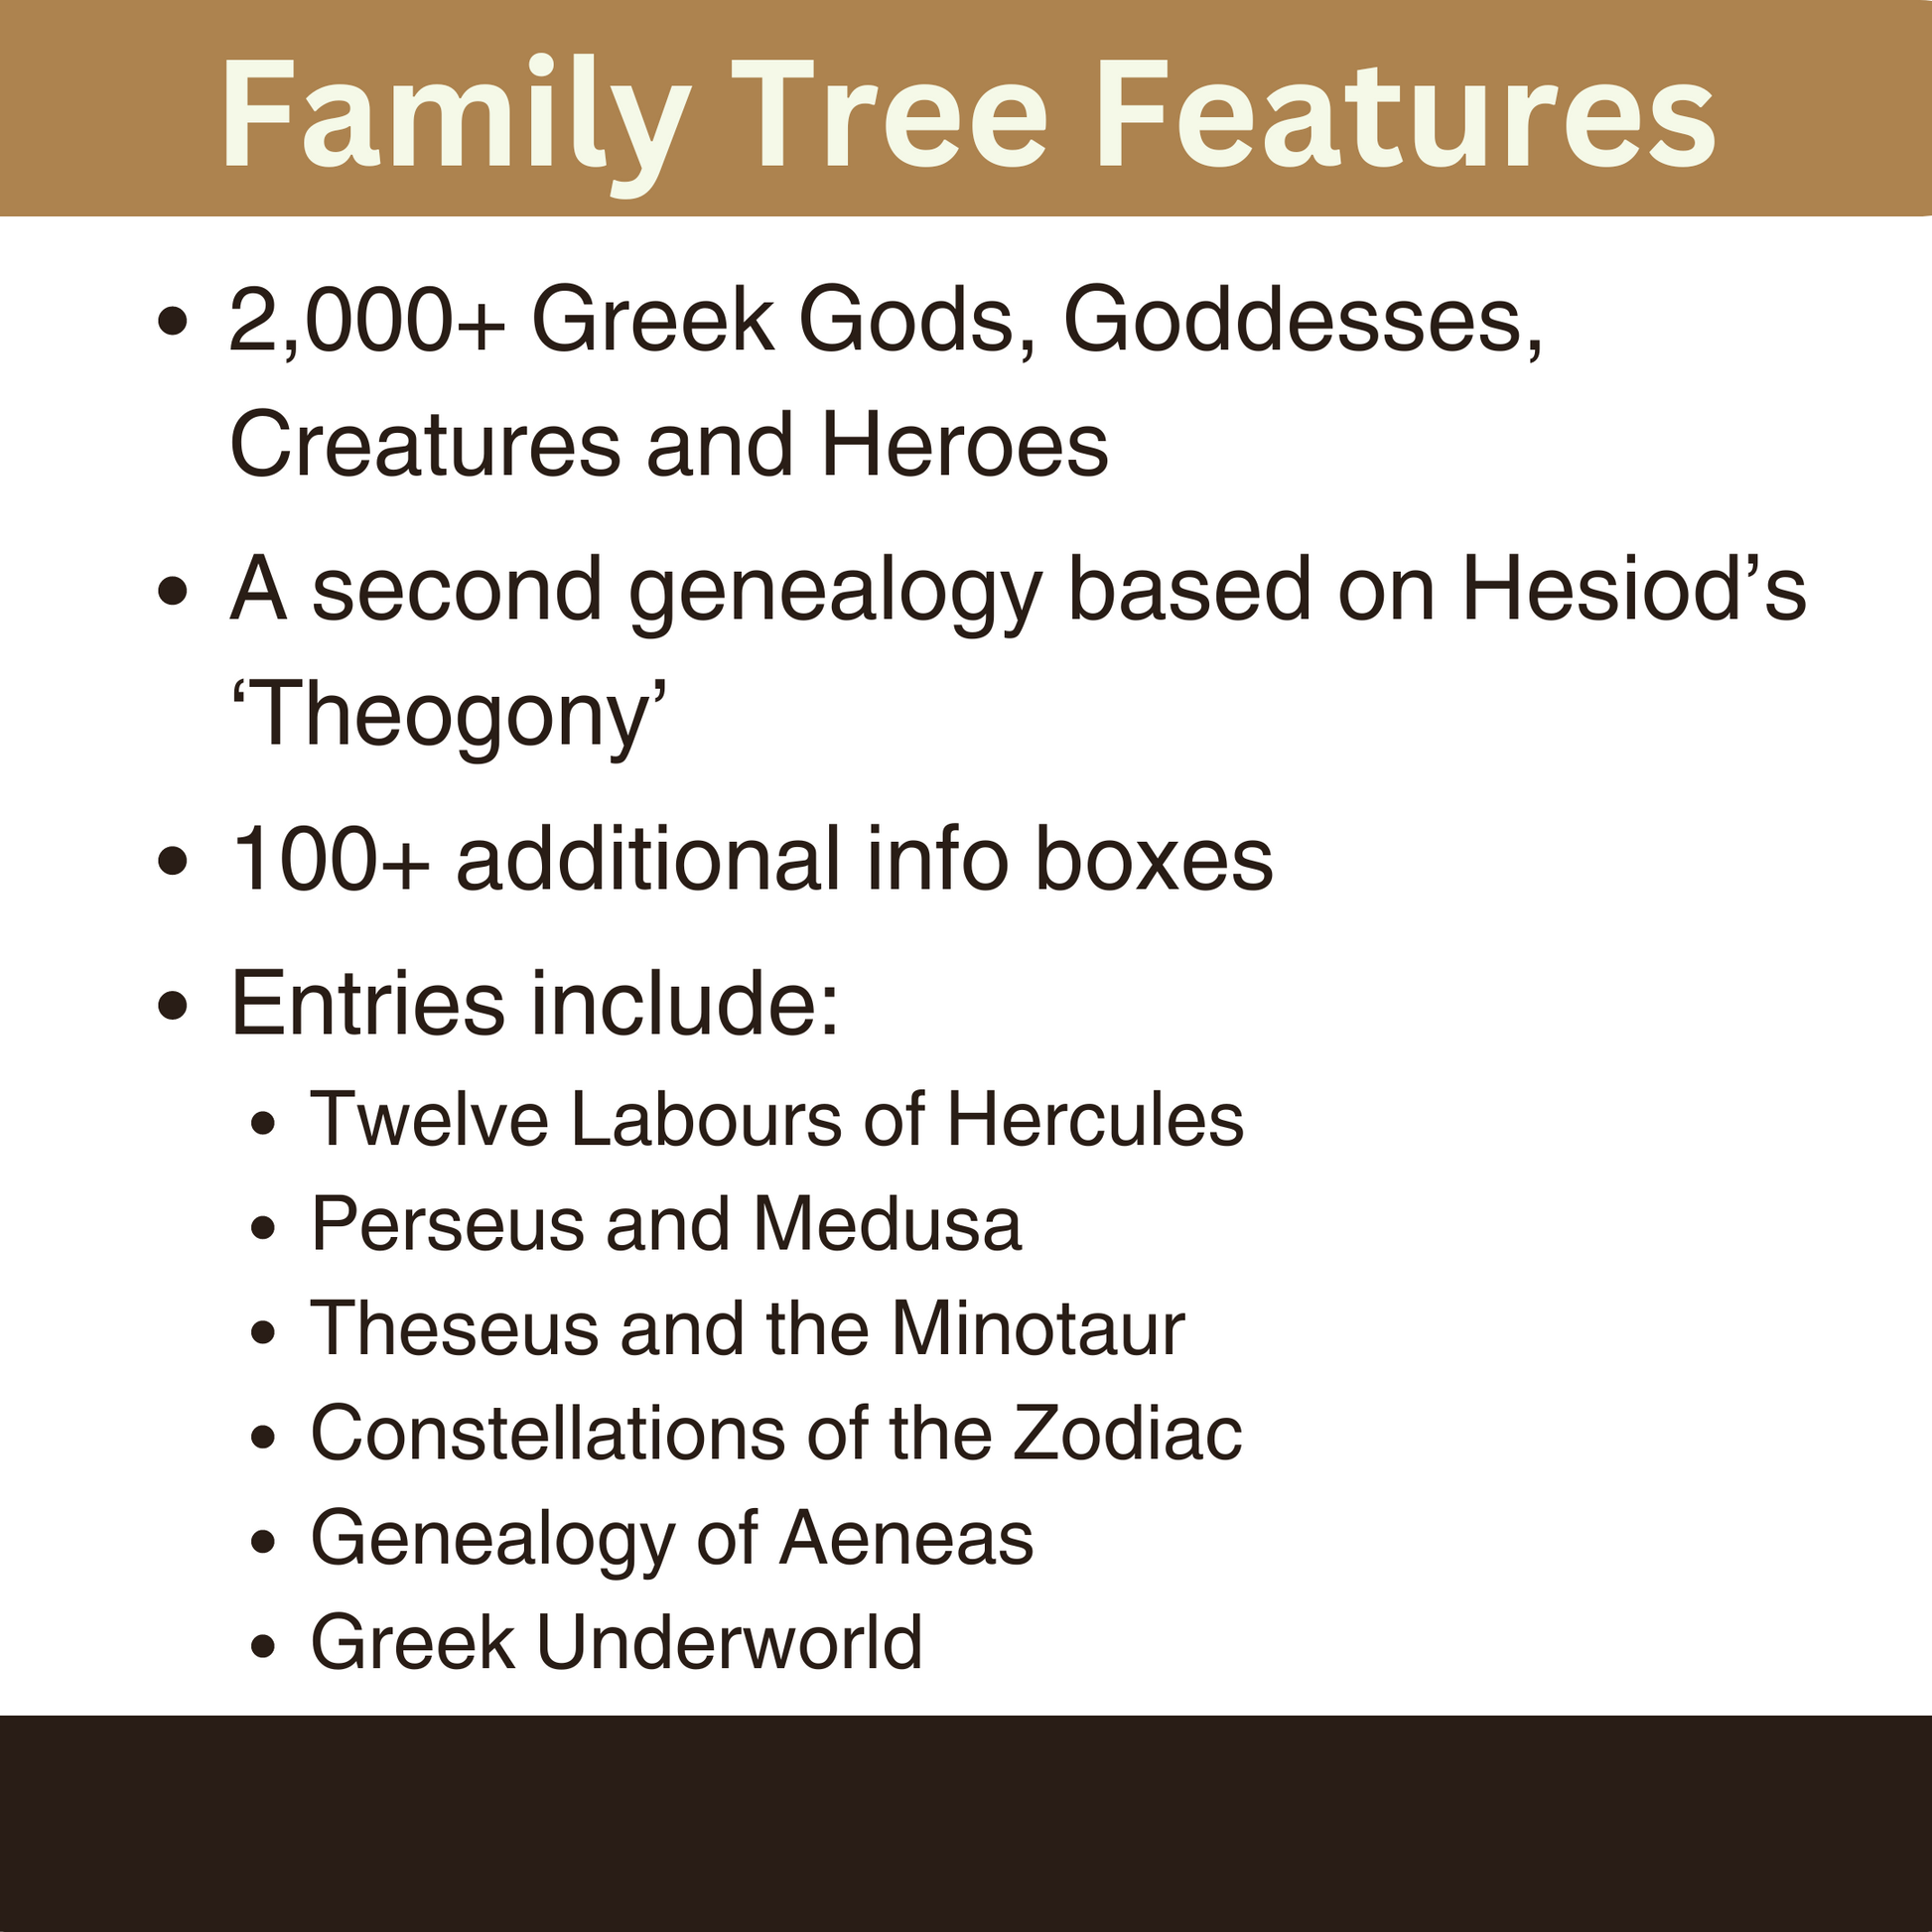 Main features of the Family Tree of the Greek Gods.